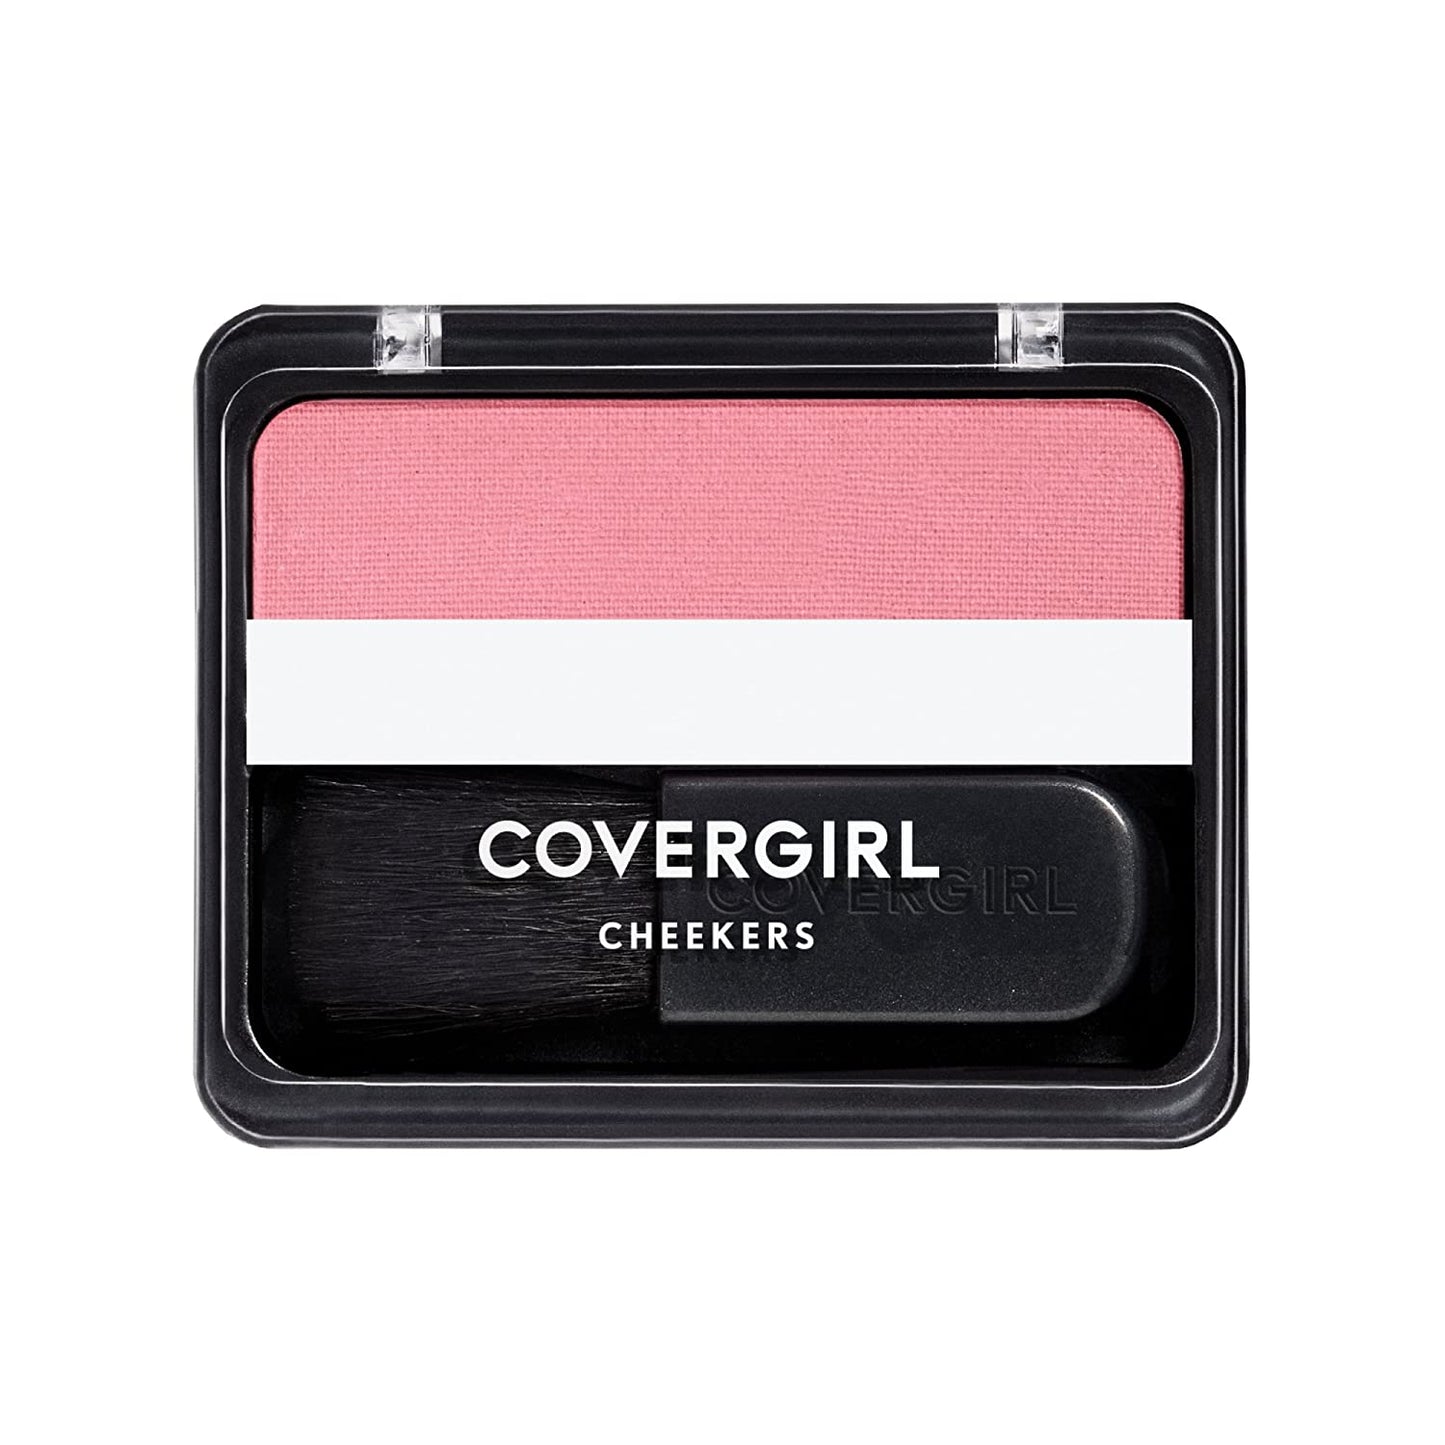 COVERGIRL Cheekers Blendable Powder Blush, Classic Pink, 1 Count (Packaging May Vary)